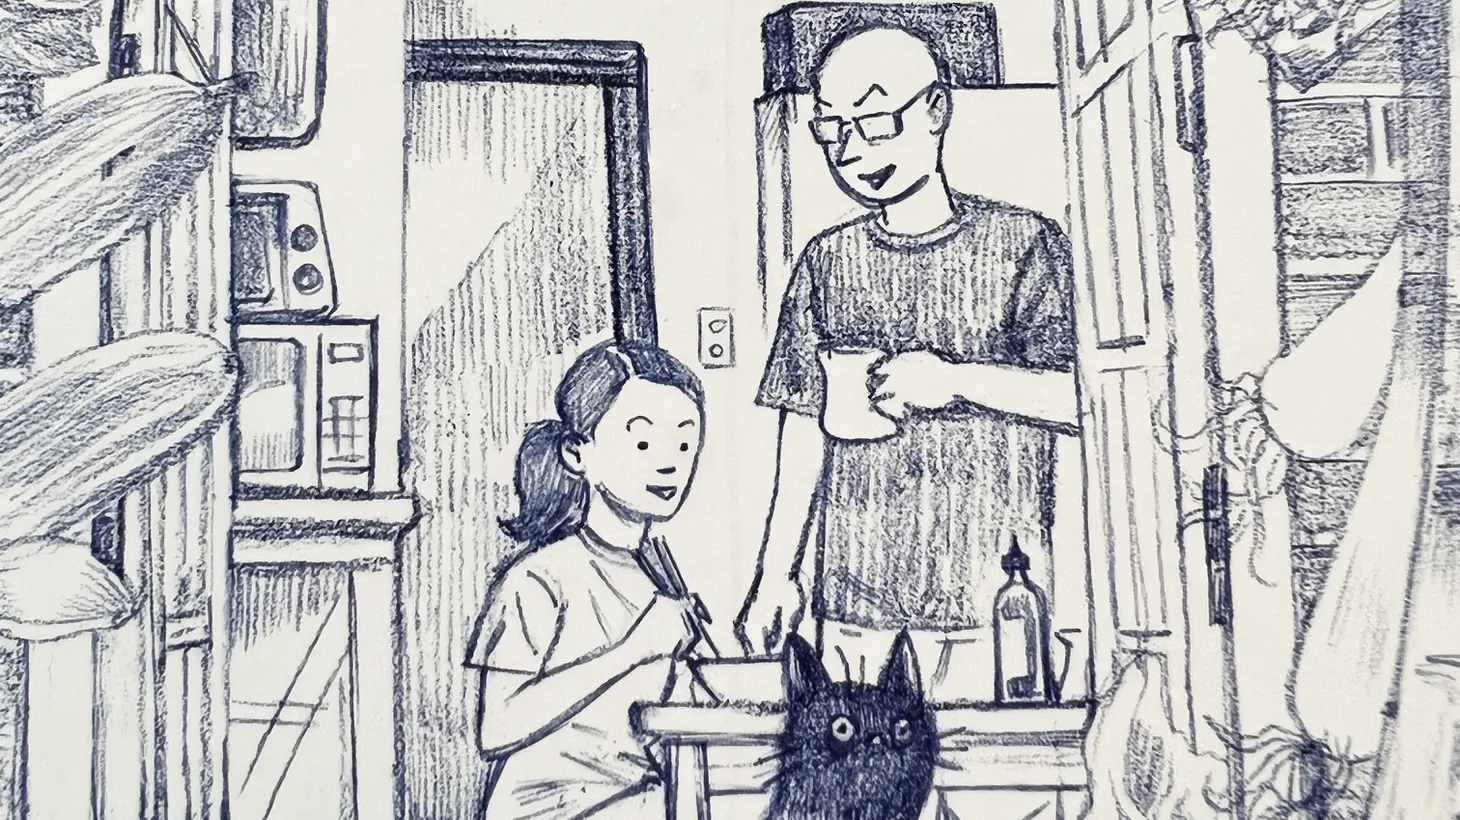 Recipes, dish washing, cats, and love, Sungyoon Choi says that sketching quotidian chores and situations is therapeutic.